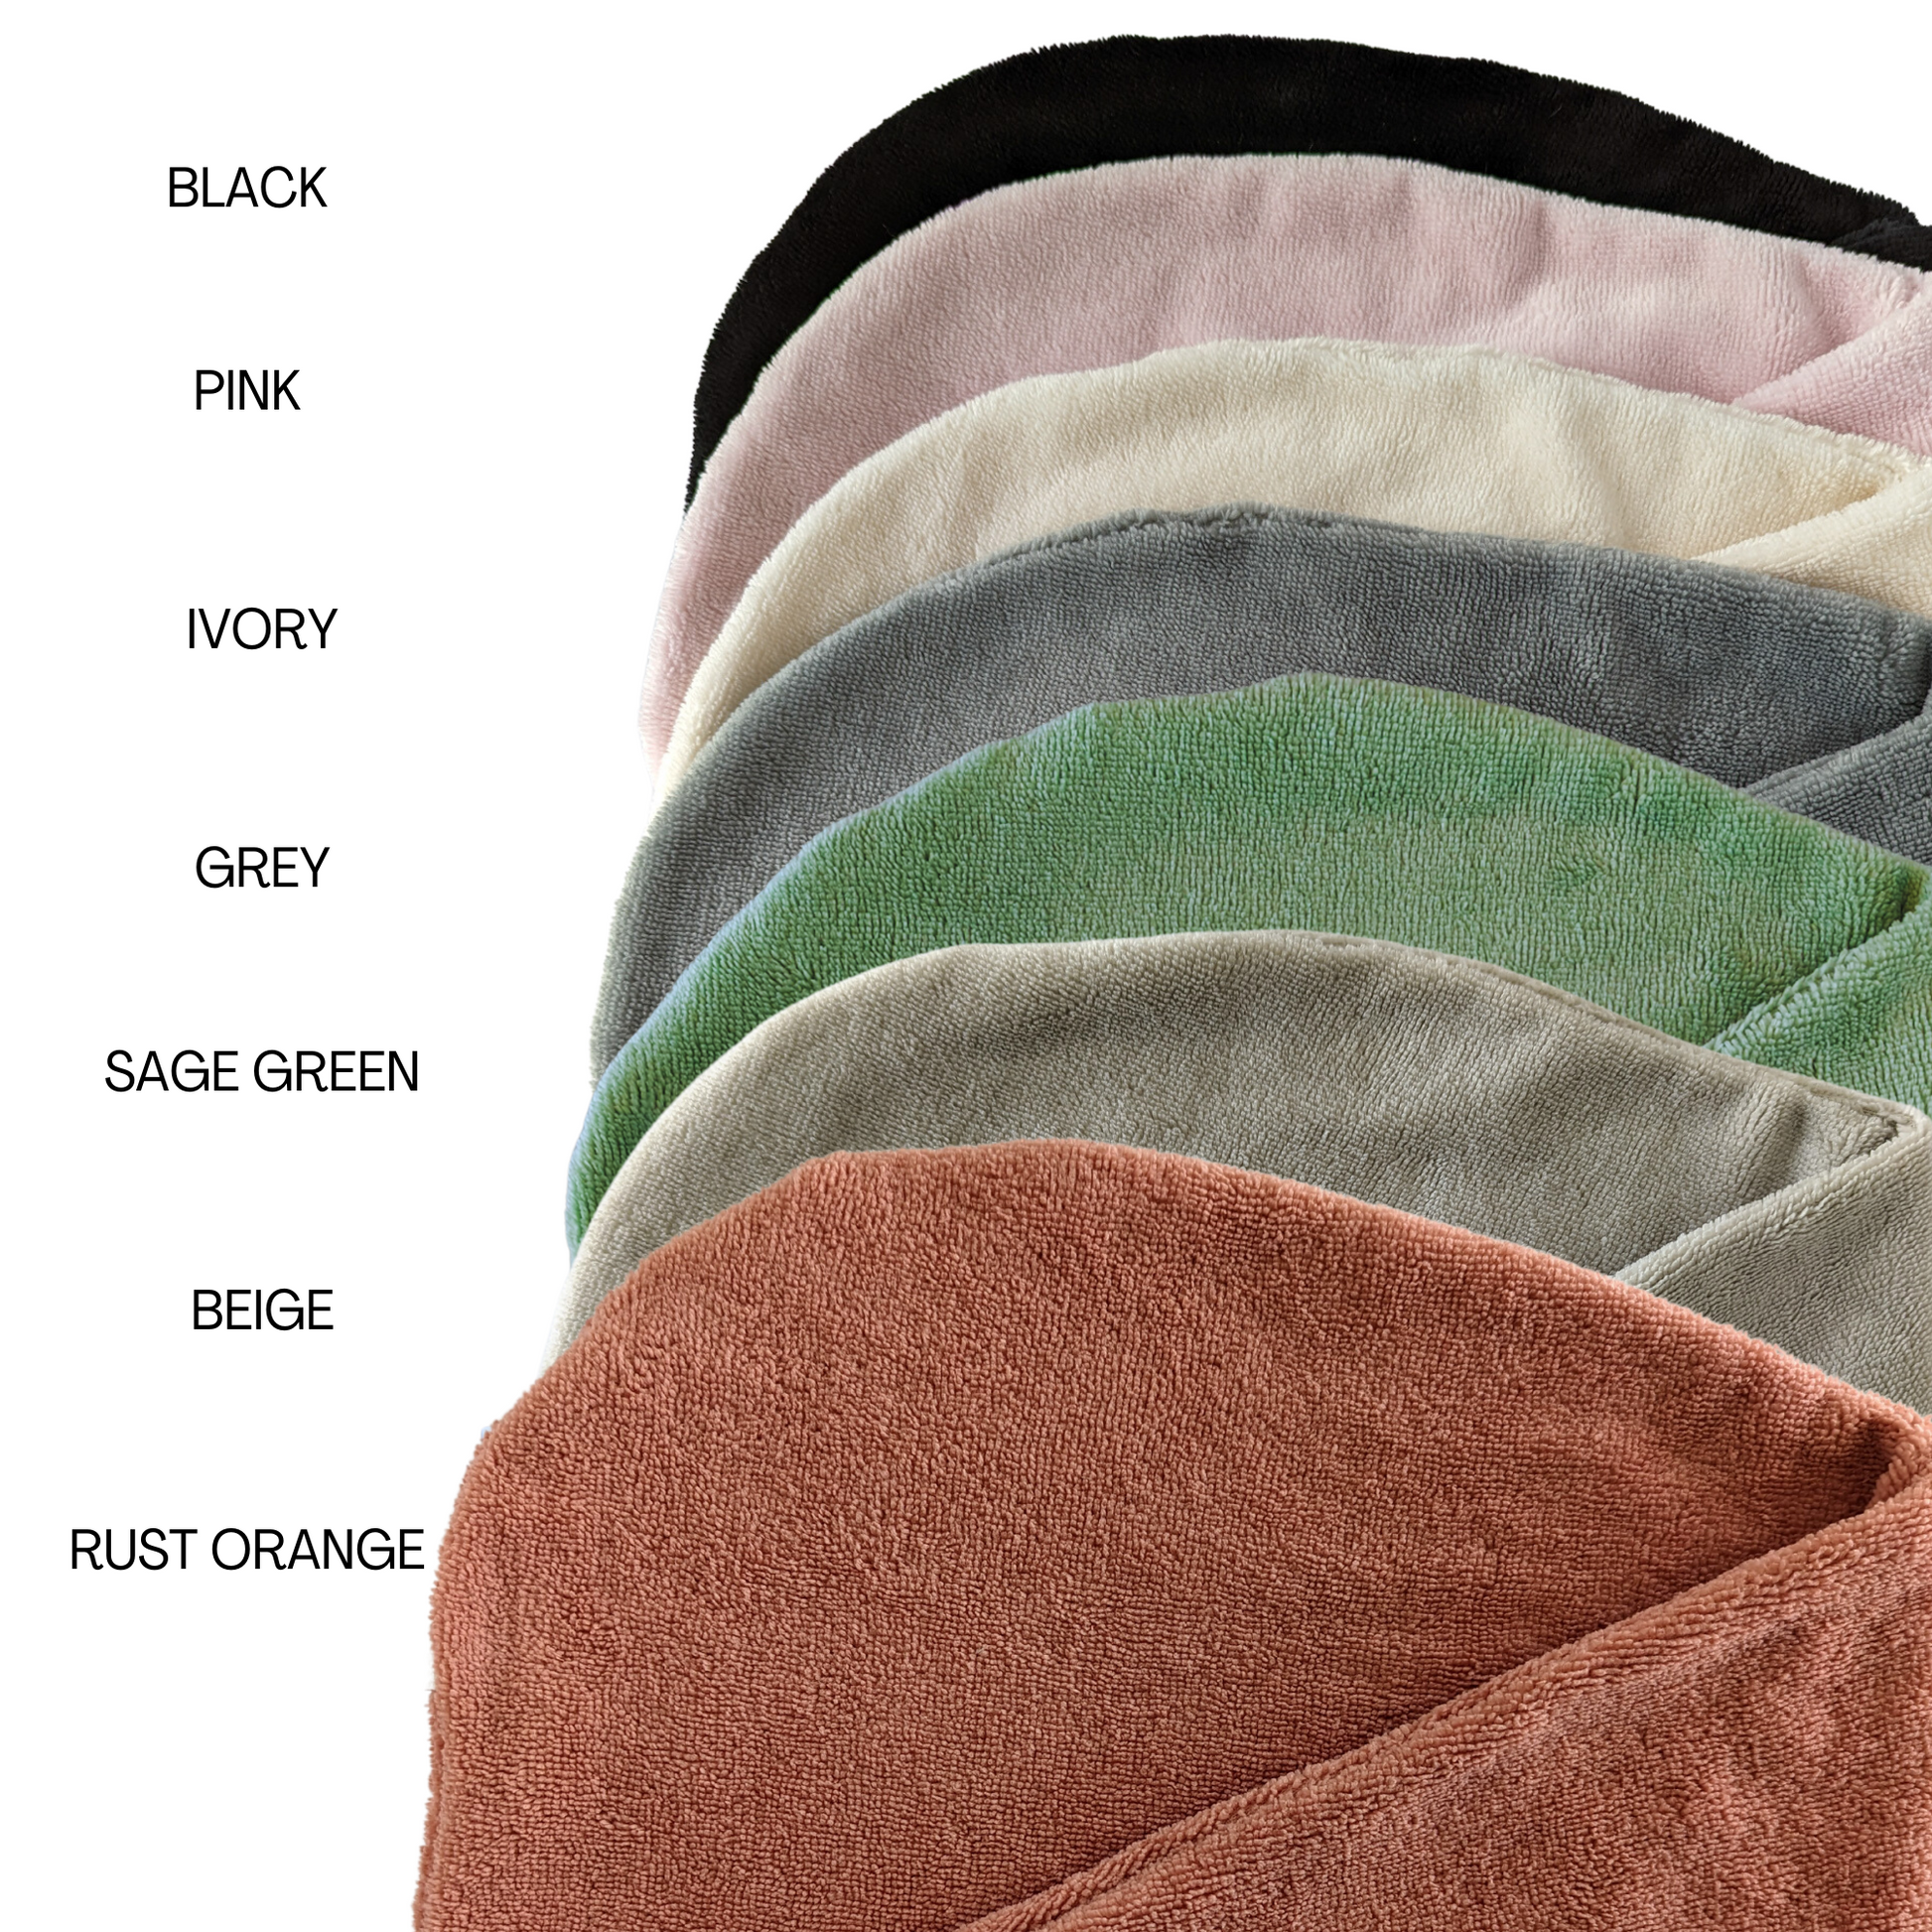 hair towels available in 7 colours, black, pink , ivory, grey, sage green, beige, rust orange